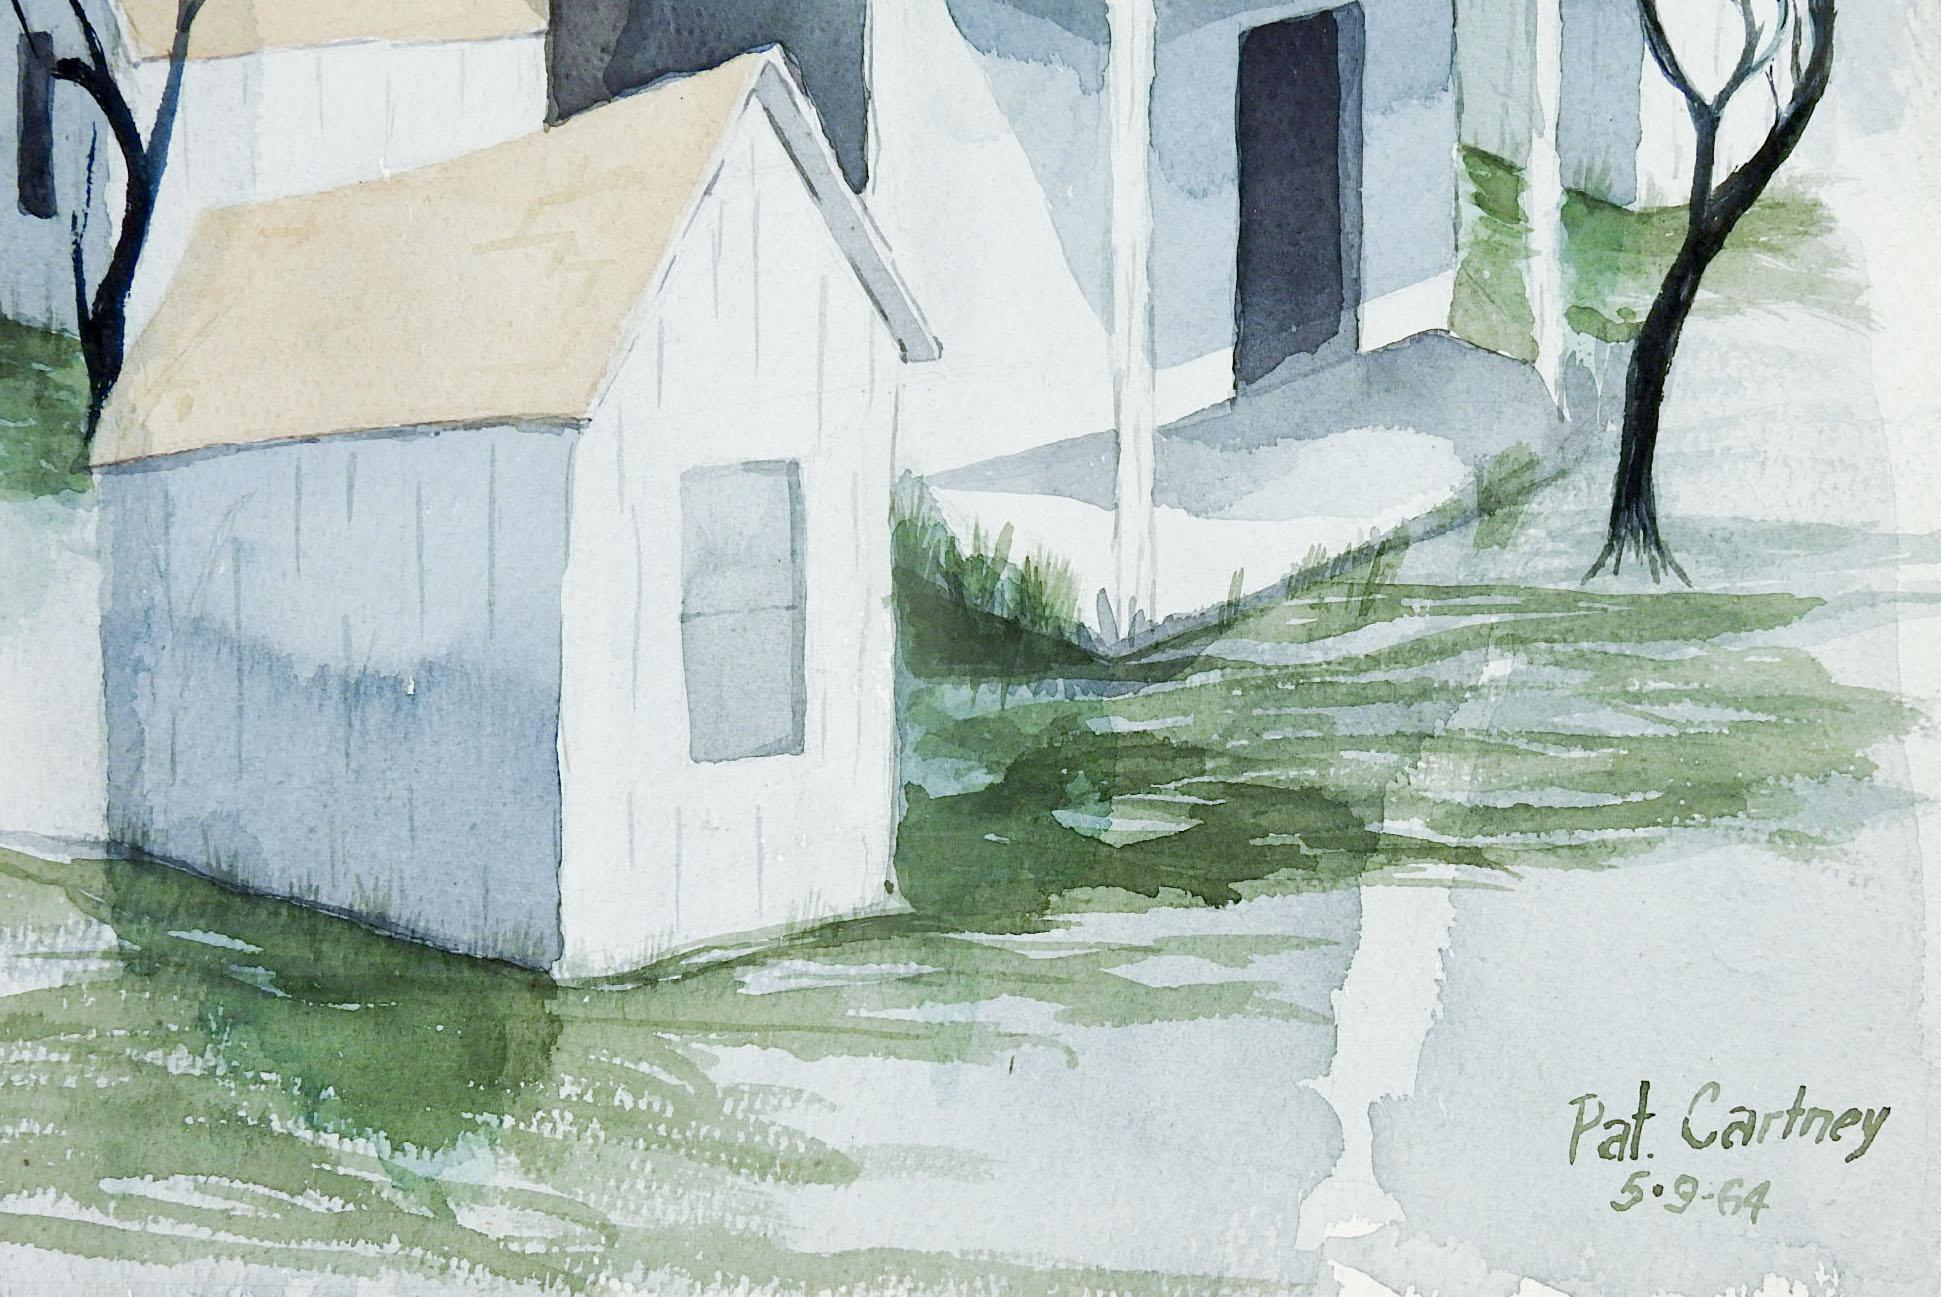 Watercolor on paper of Modernist farmhouse by Pat Chartney. Signed and dated 1964 lower right corner. Unframed, age toning.